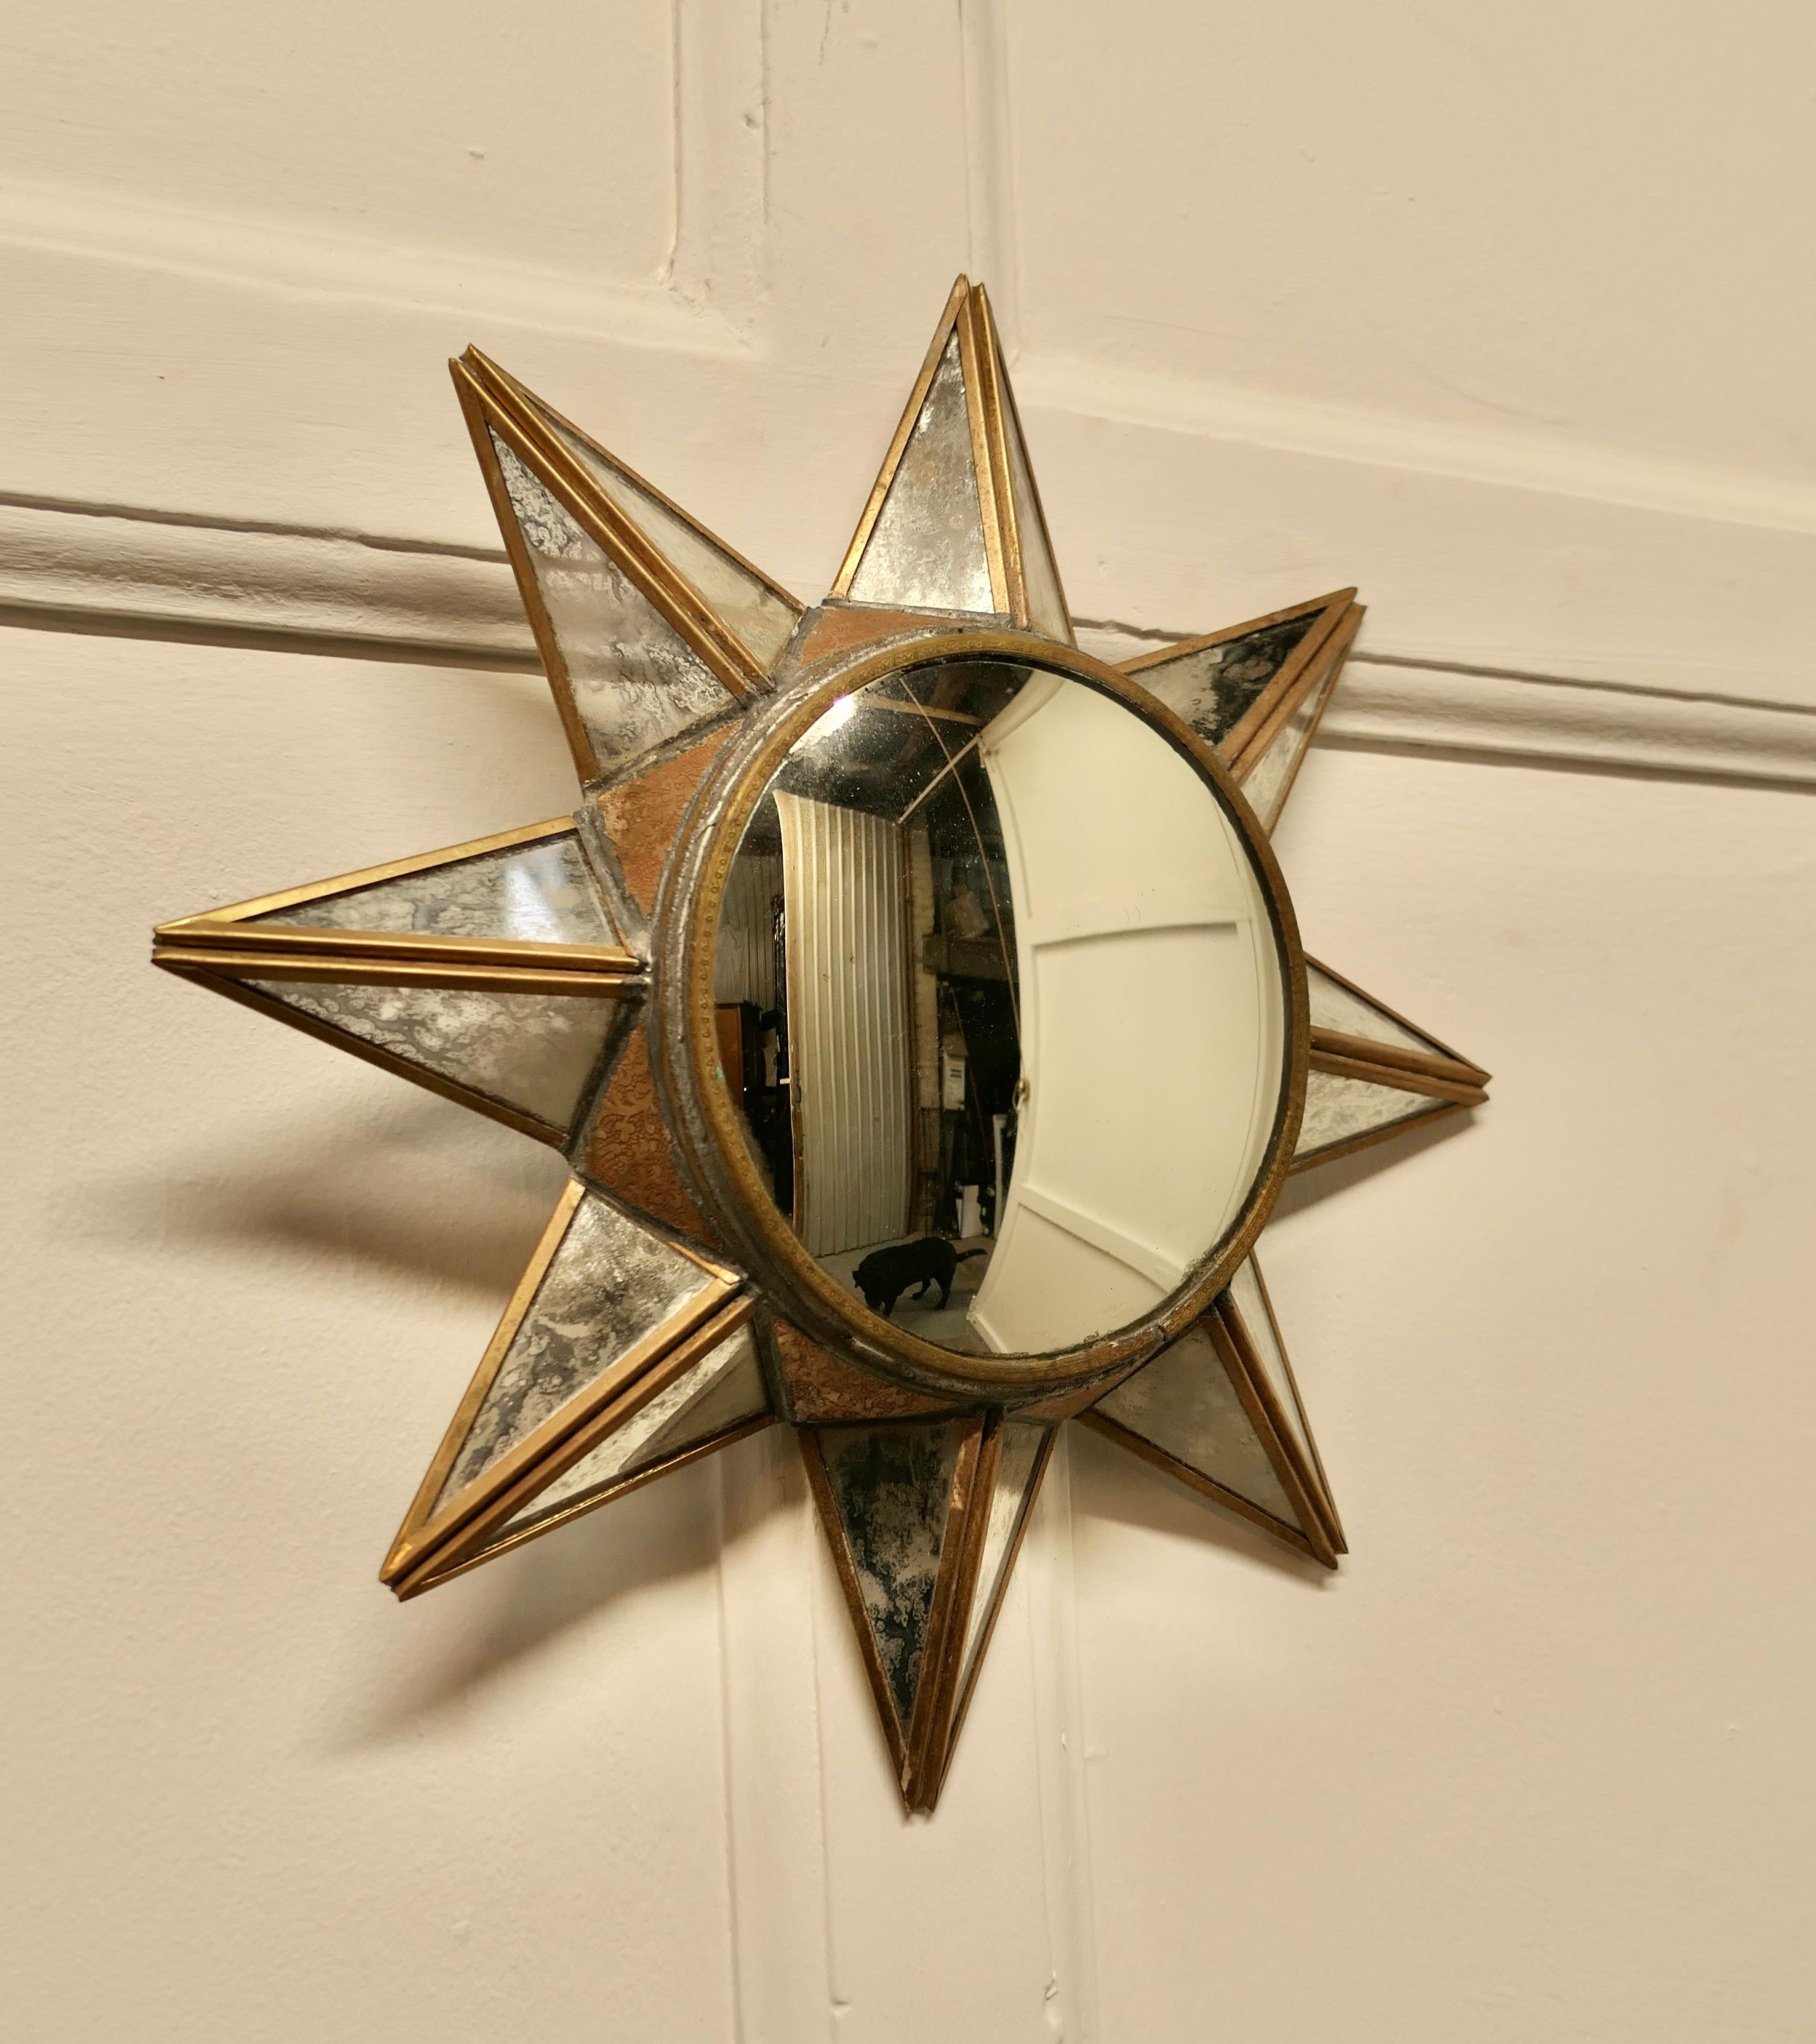 French Art Deco style 3D starburst mirror

A Superb stylish piece, the starburst radiates out from the central mirror, each of the 8 rays are double sided forming a triangle in the brass frame 
A Classic design from the 1960s era now an